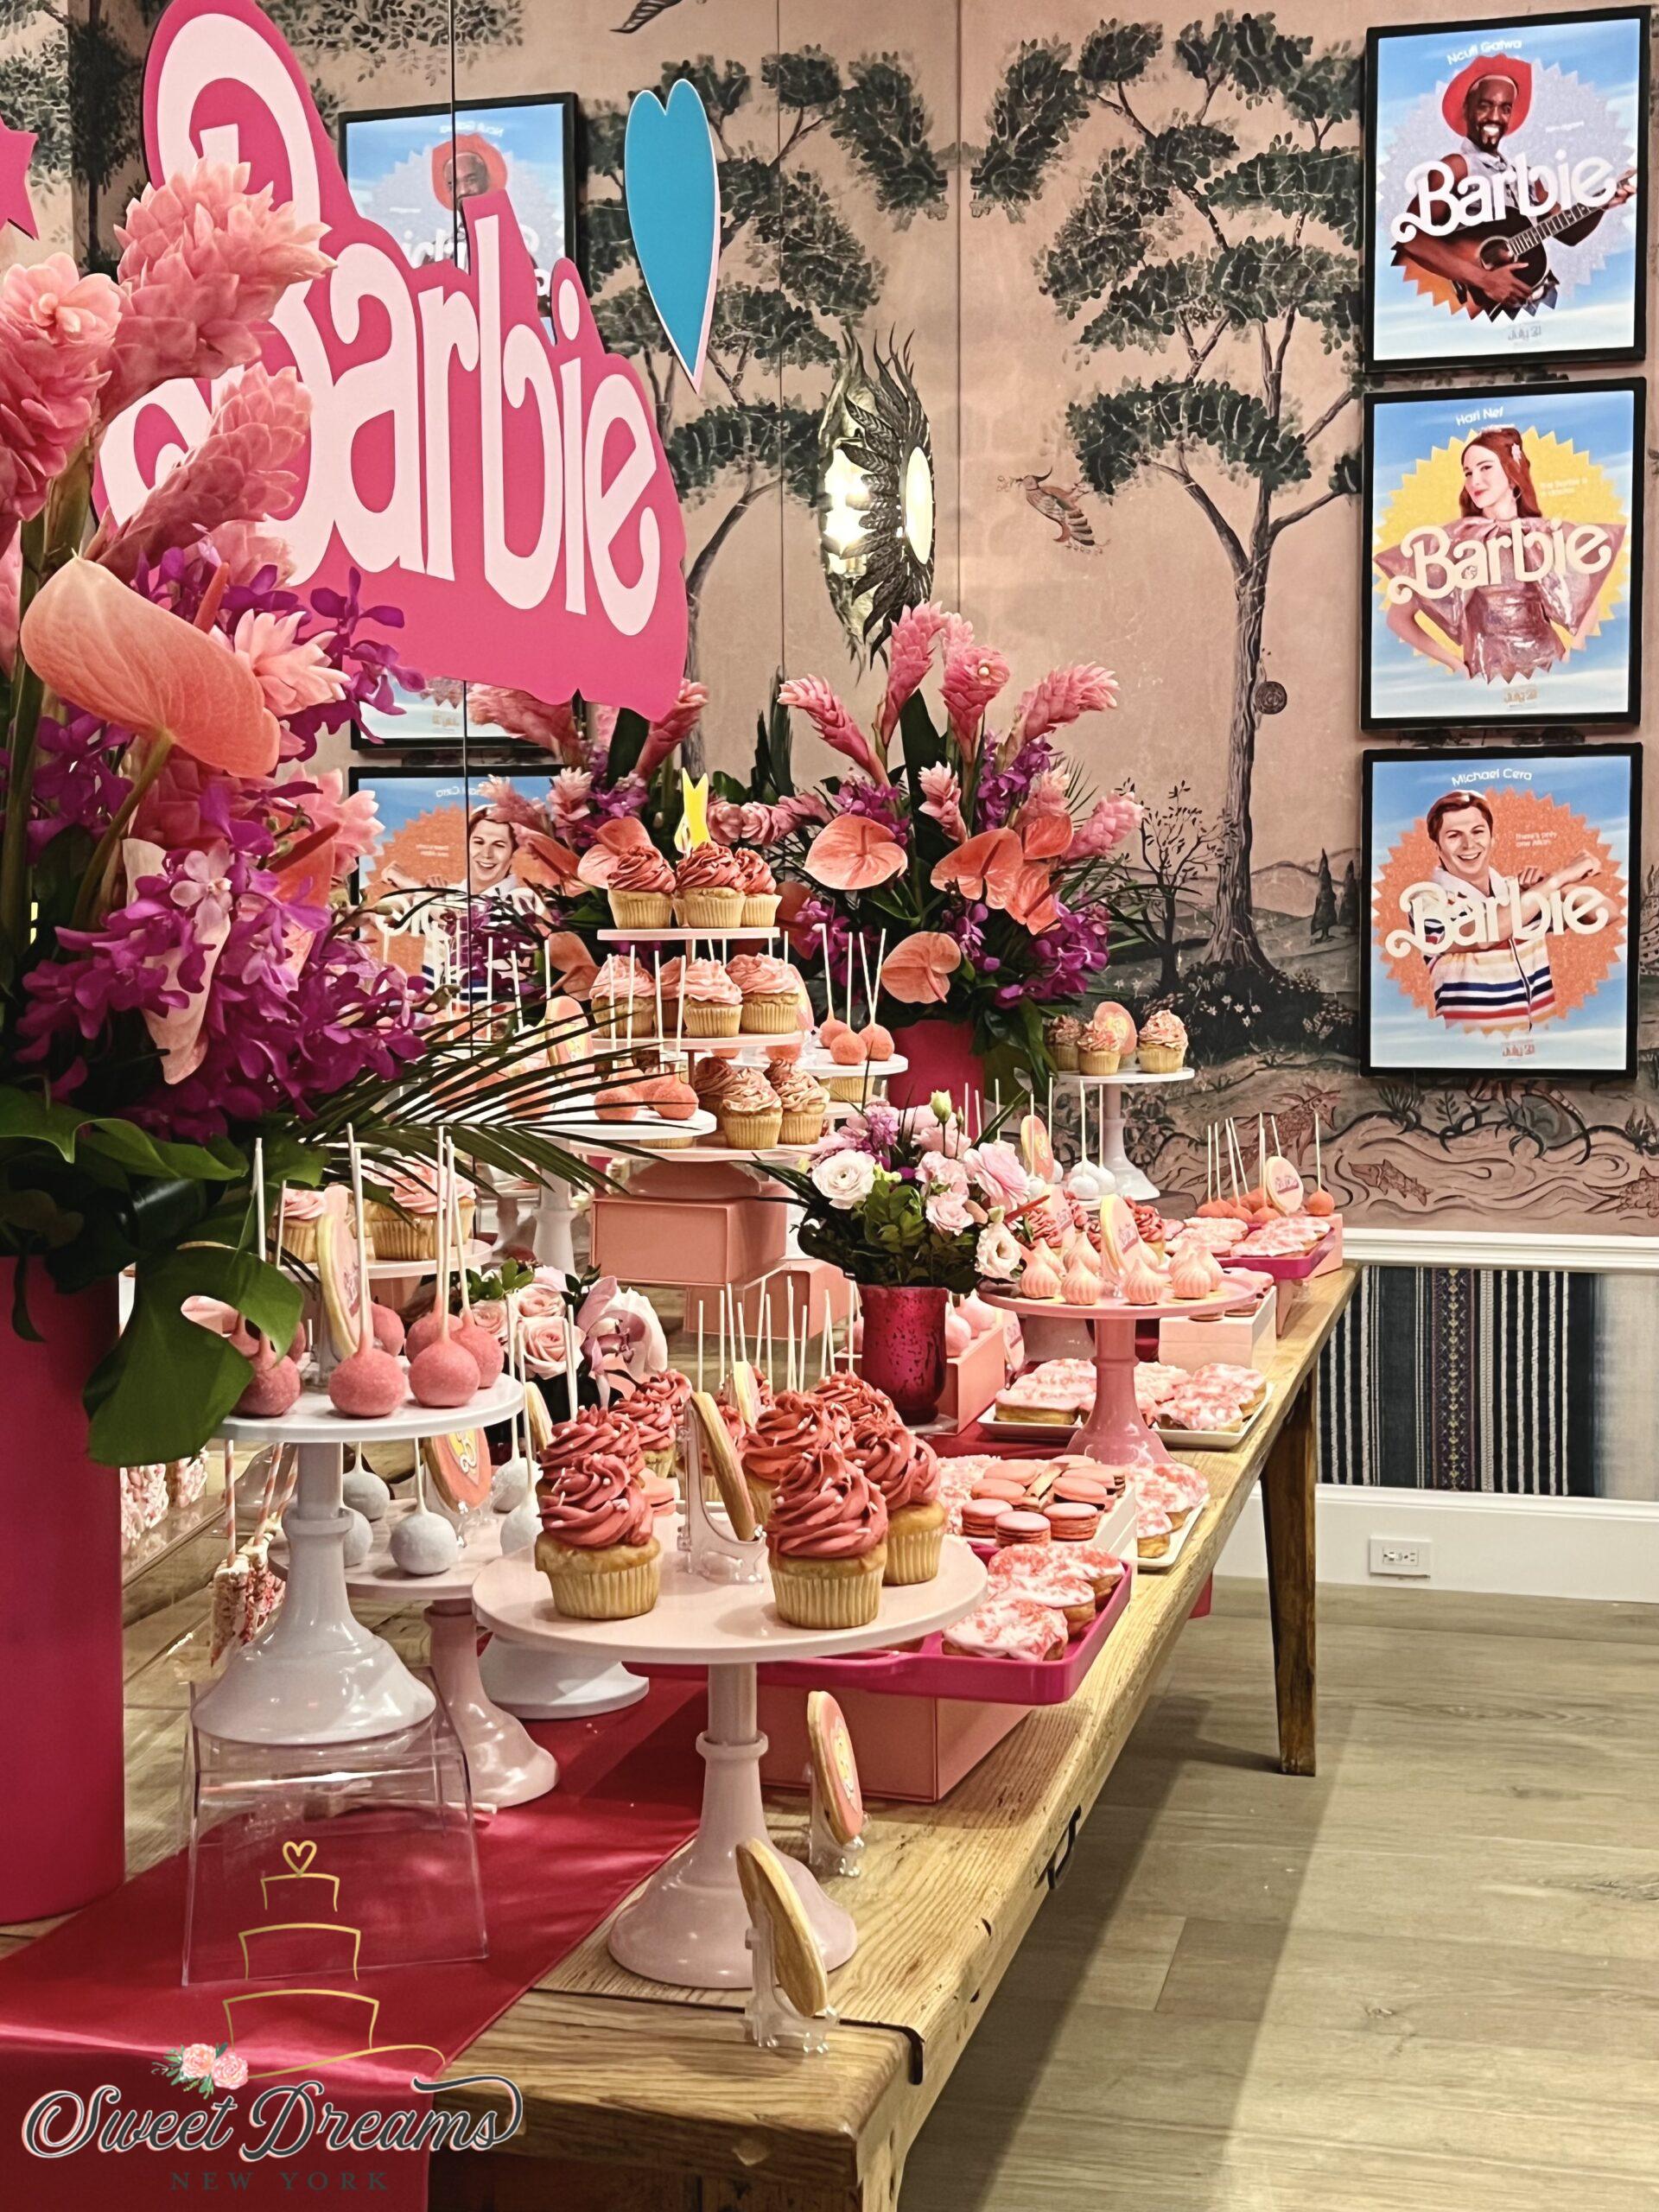 Barbie The Movie Dessert Table NYC Premiere Pink Cupcakes Barbie Themed birthday Bridal Shower Long Island